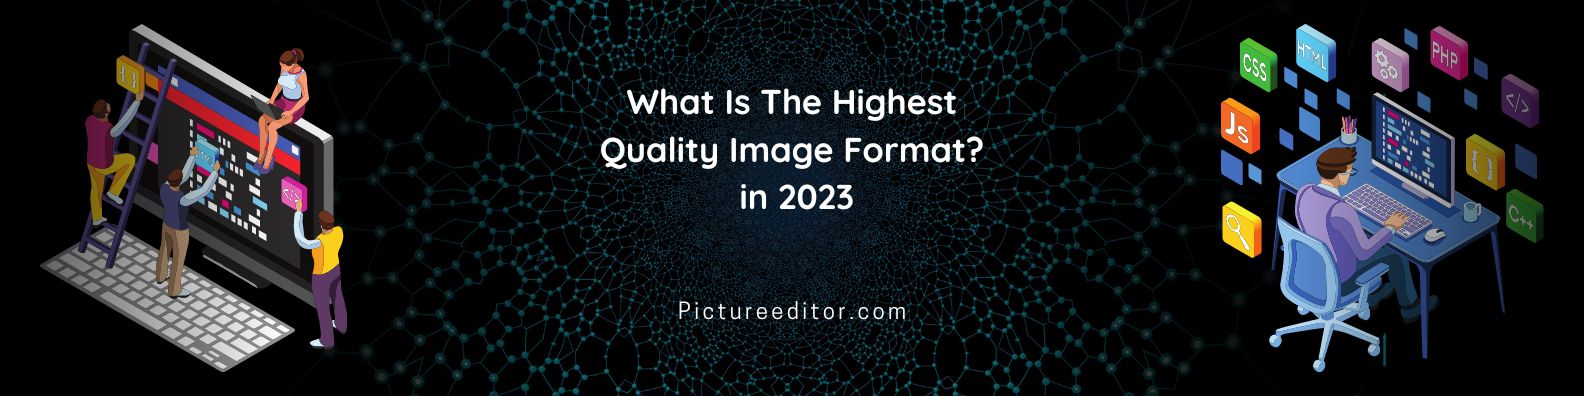 What Is The Highest Quality Image Format in 2023